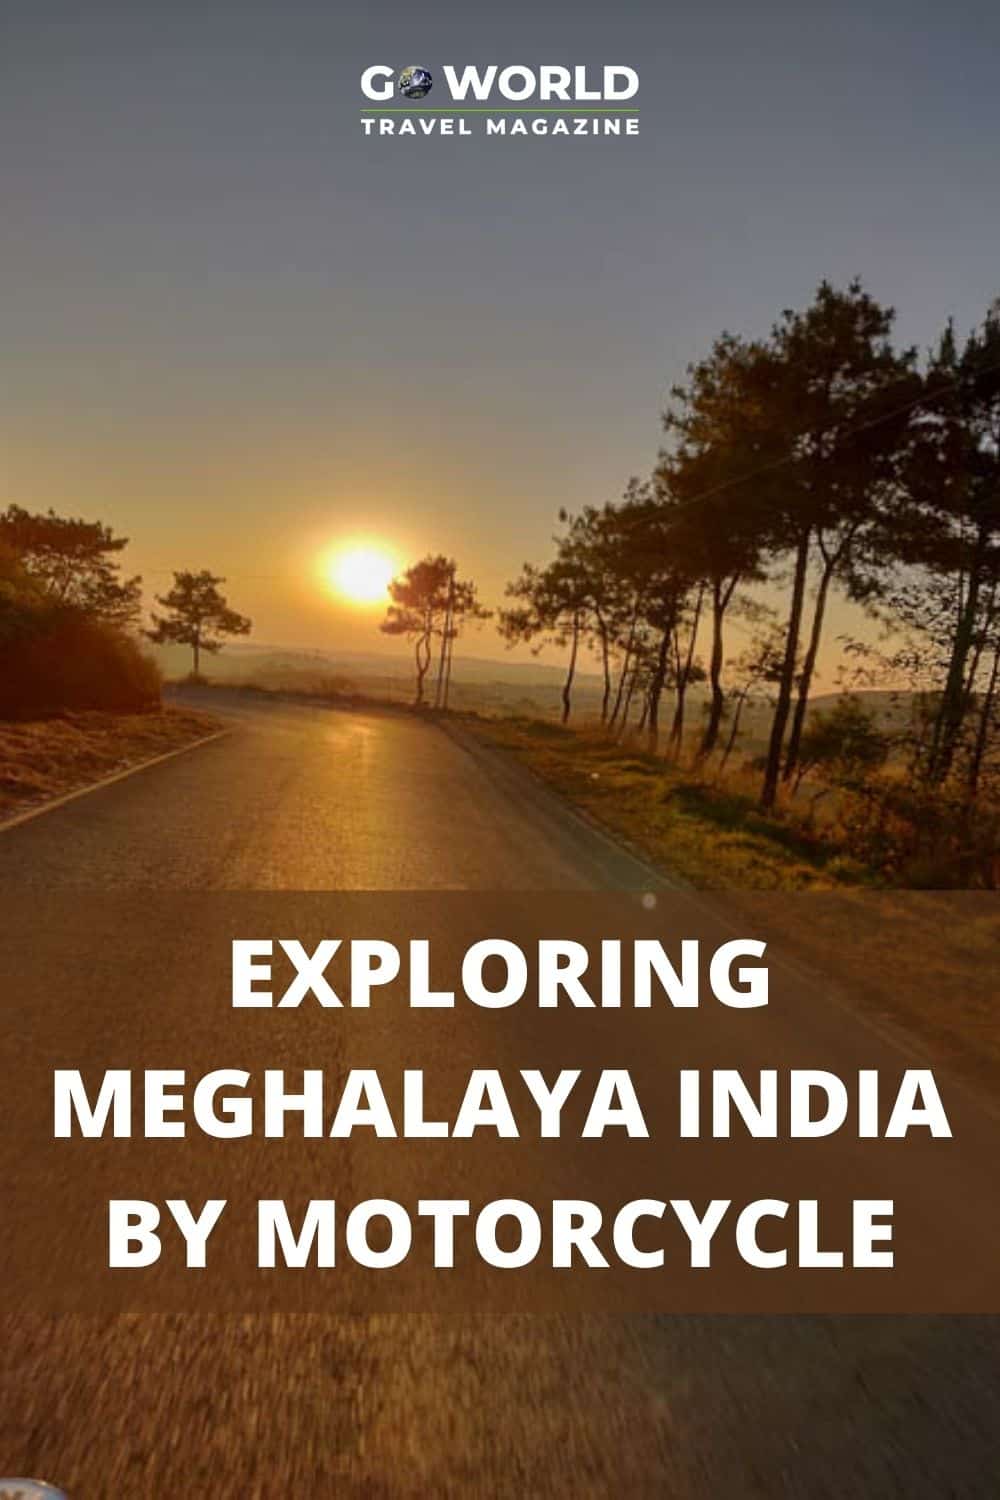 Discover Meghalaya, India by motorcycle. A place full of natural beauty, delicious food, sacred forests, living bridges and welcoming people. #India #Indiaroadtrip